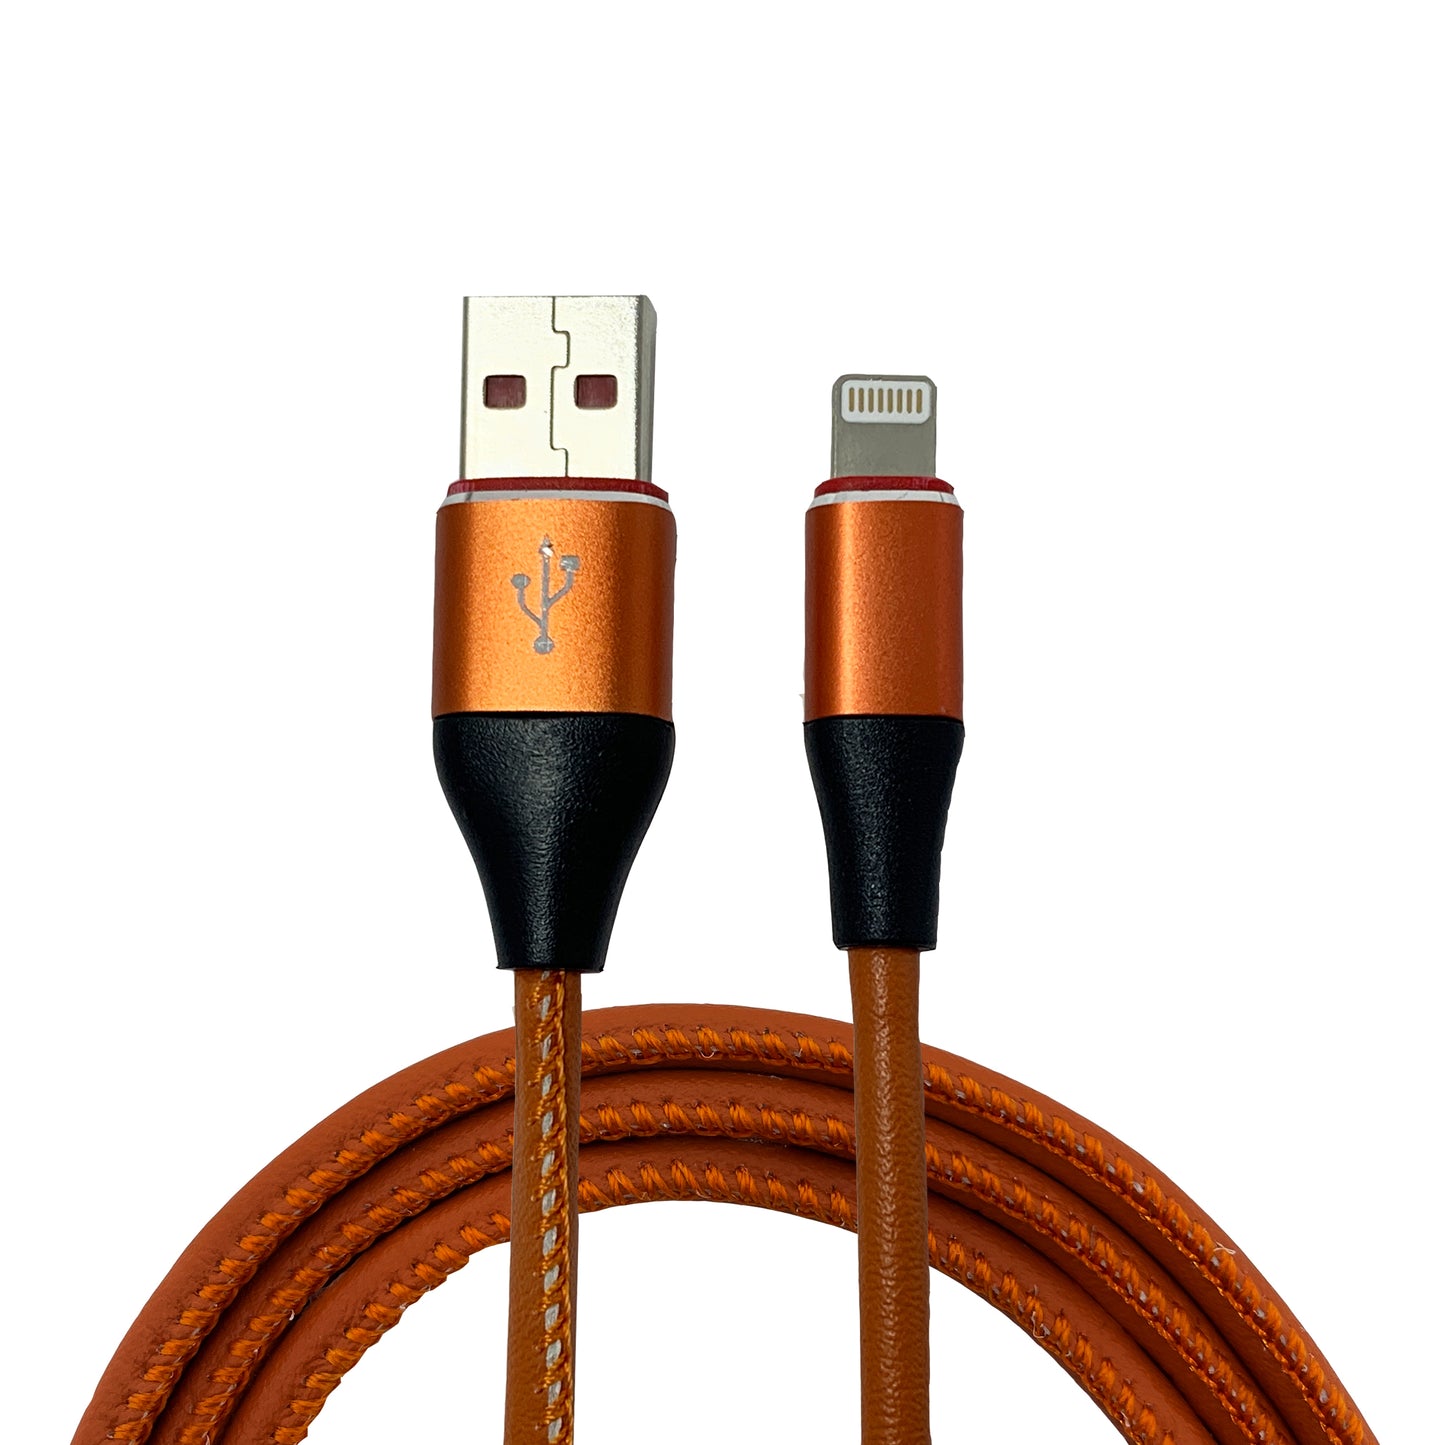 [MOTTO] Leather Wrapped Lightning iPhone Cable